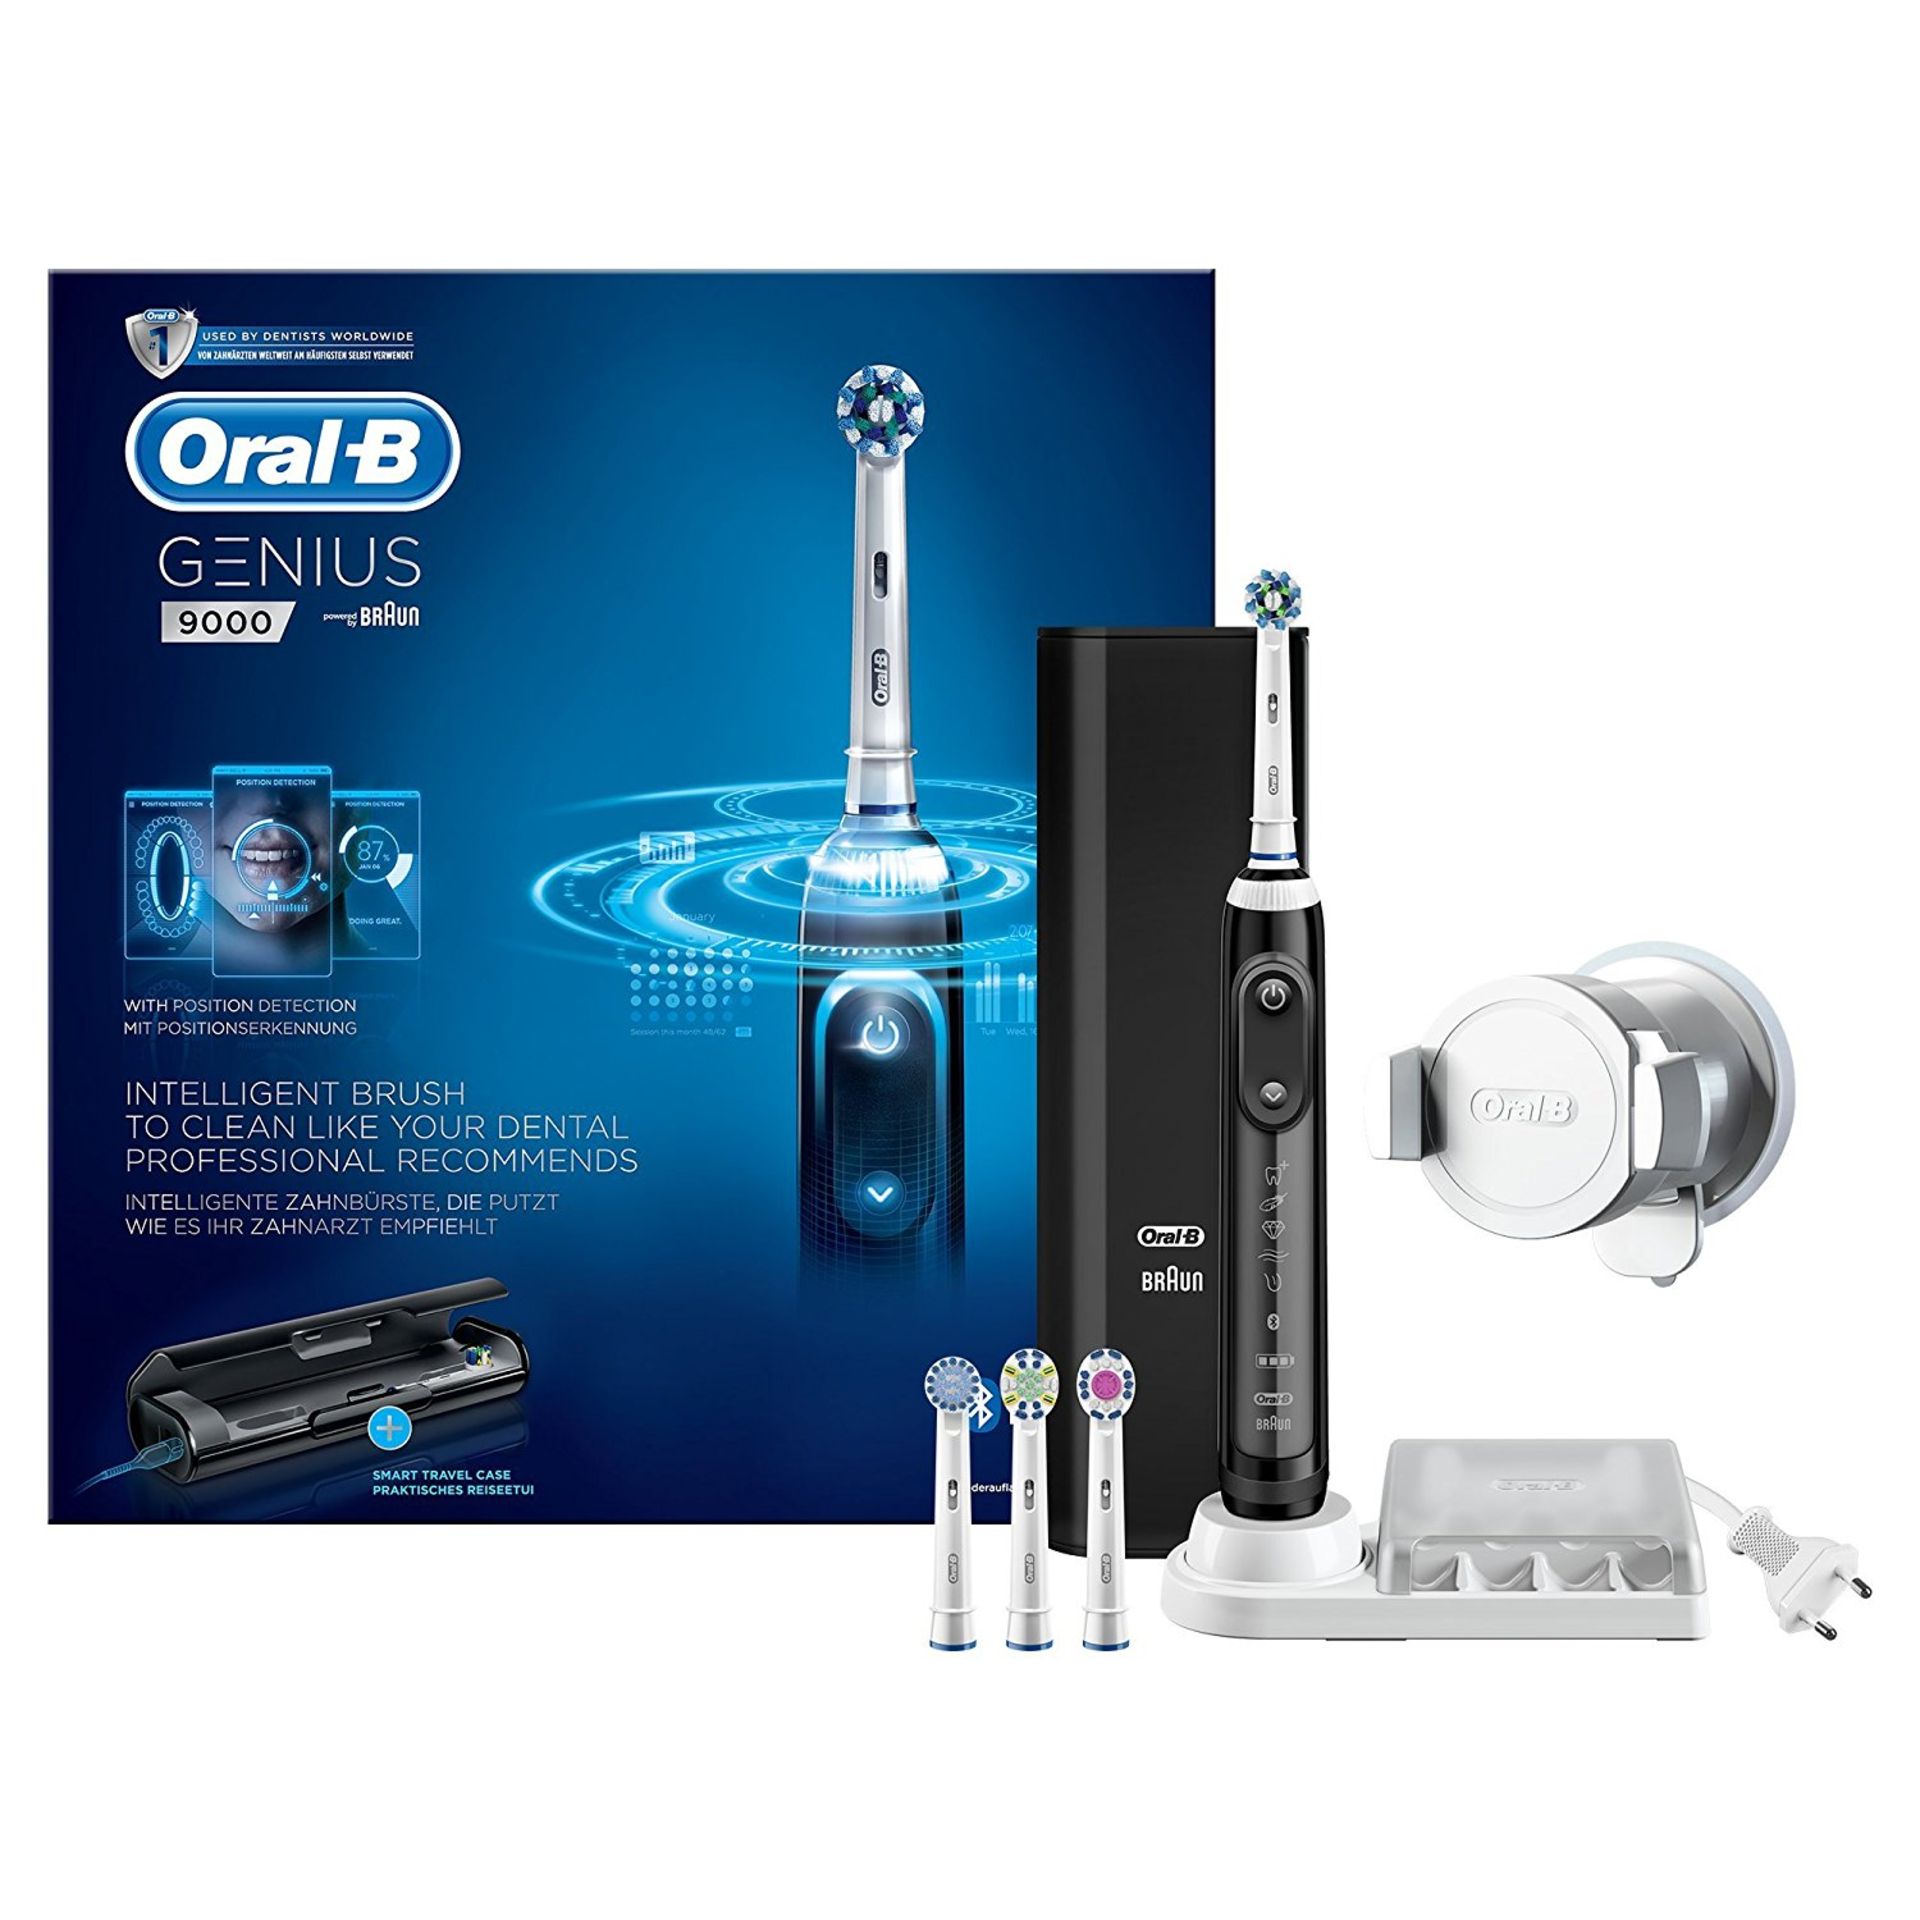 BRAND NEW Oral-B Genius 9000 Electric BLUETOOTH Toothbrush RRP £279.99.